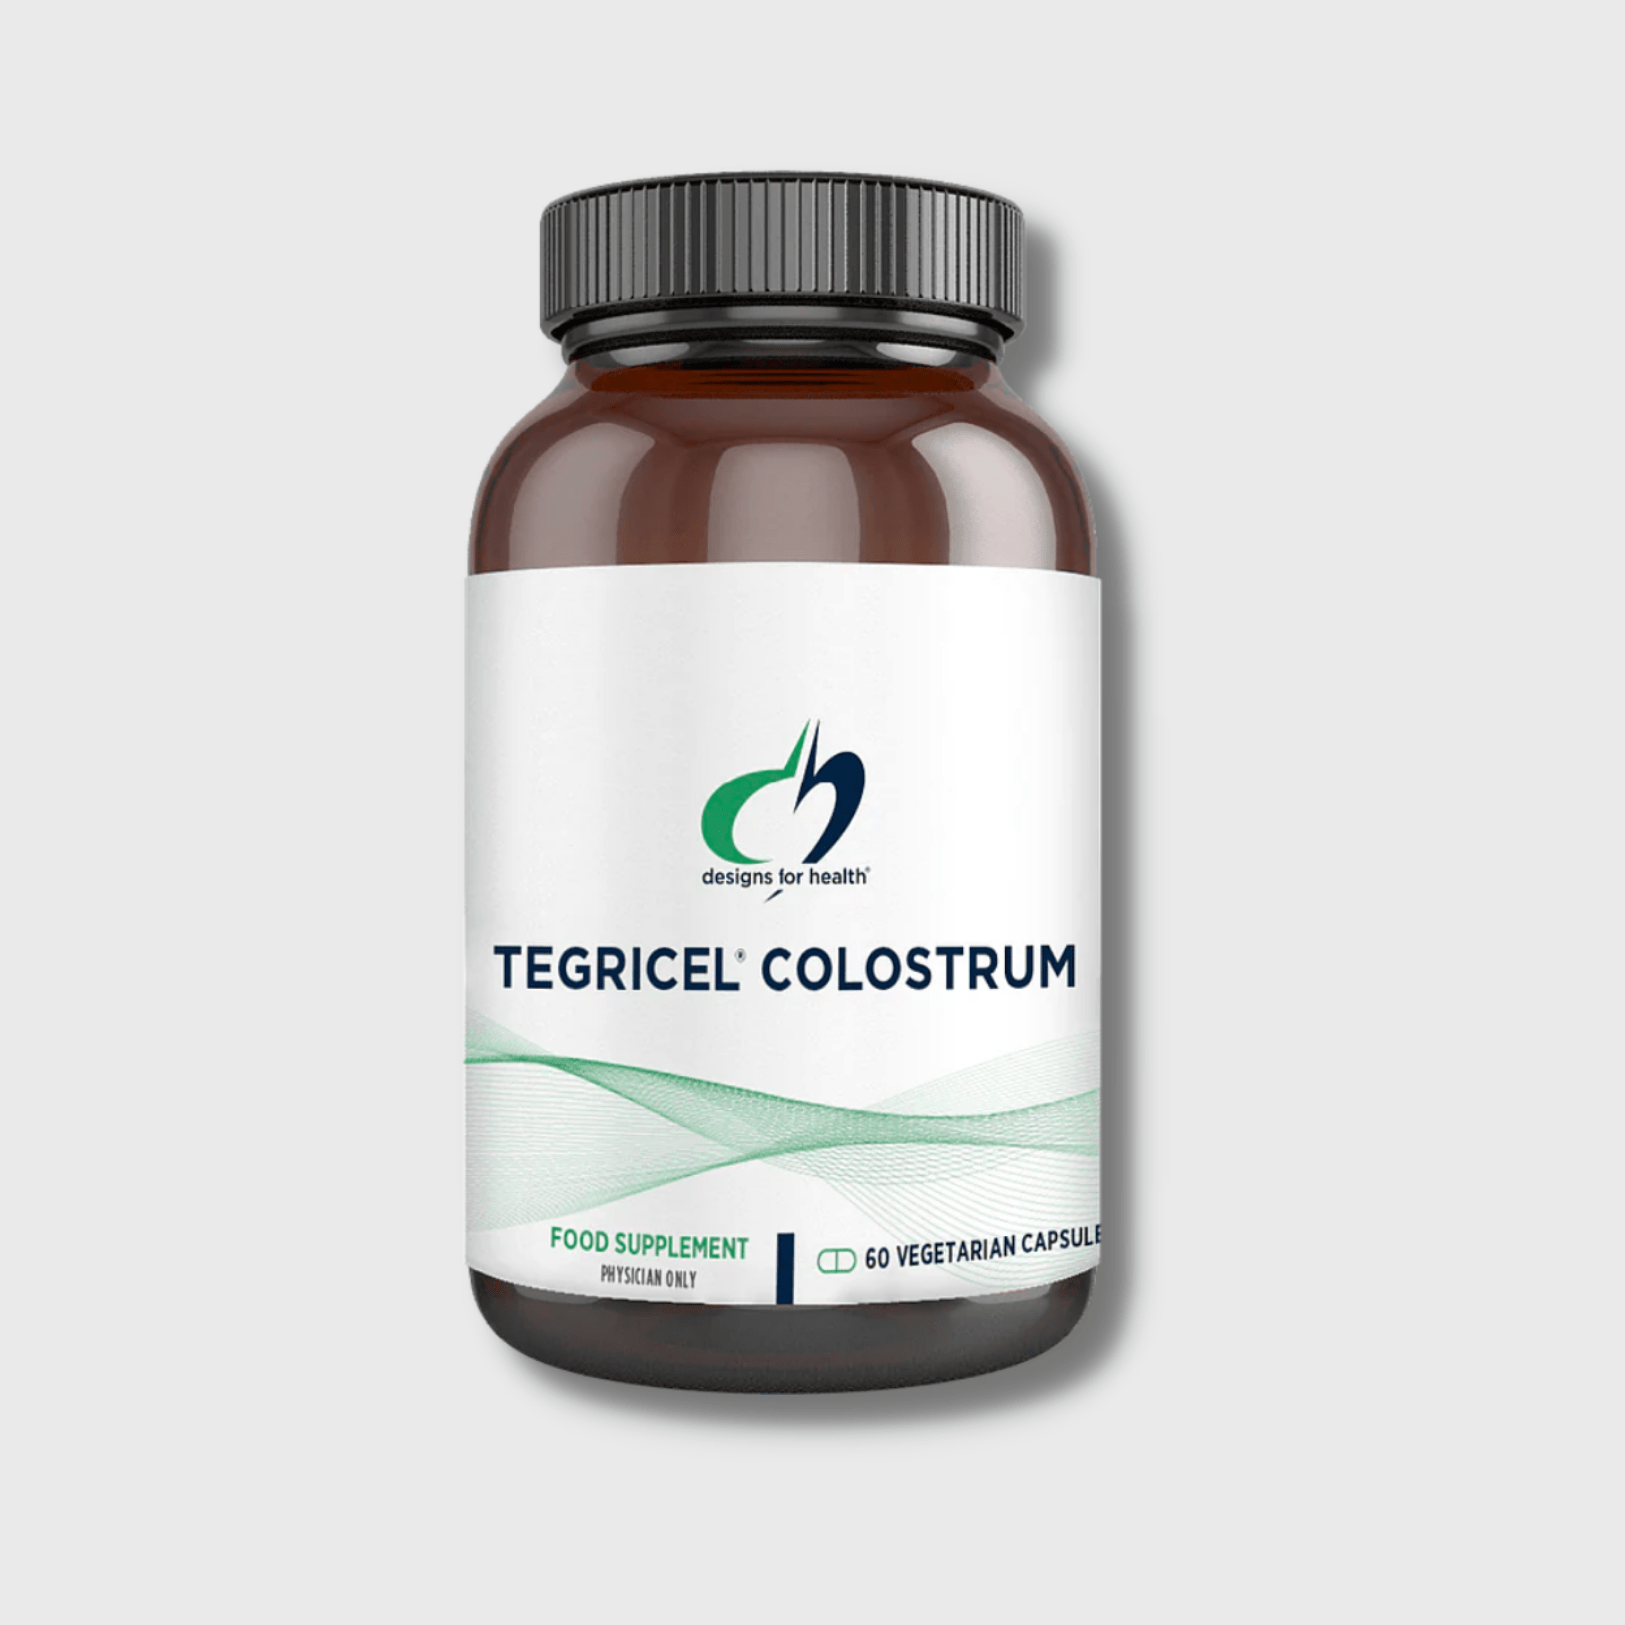 Tegrical Colostrum